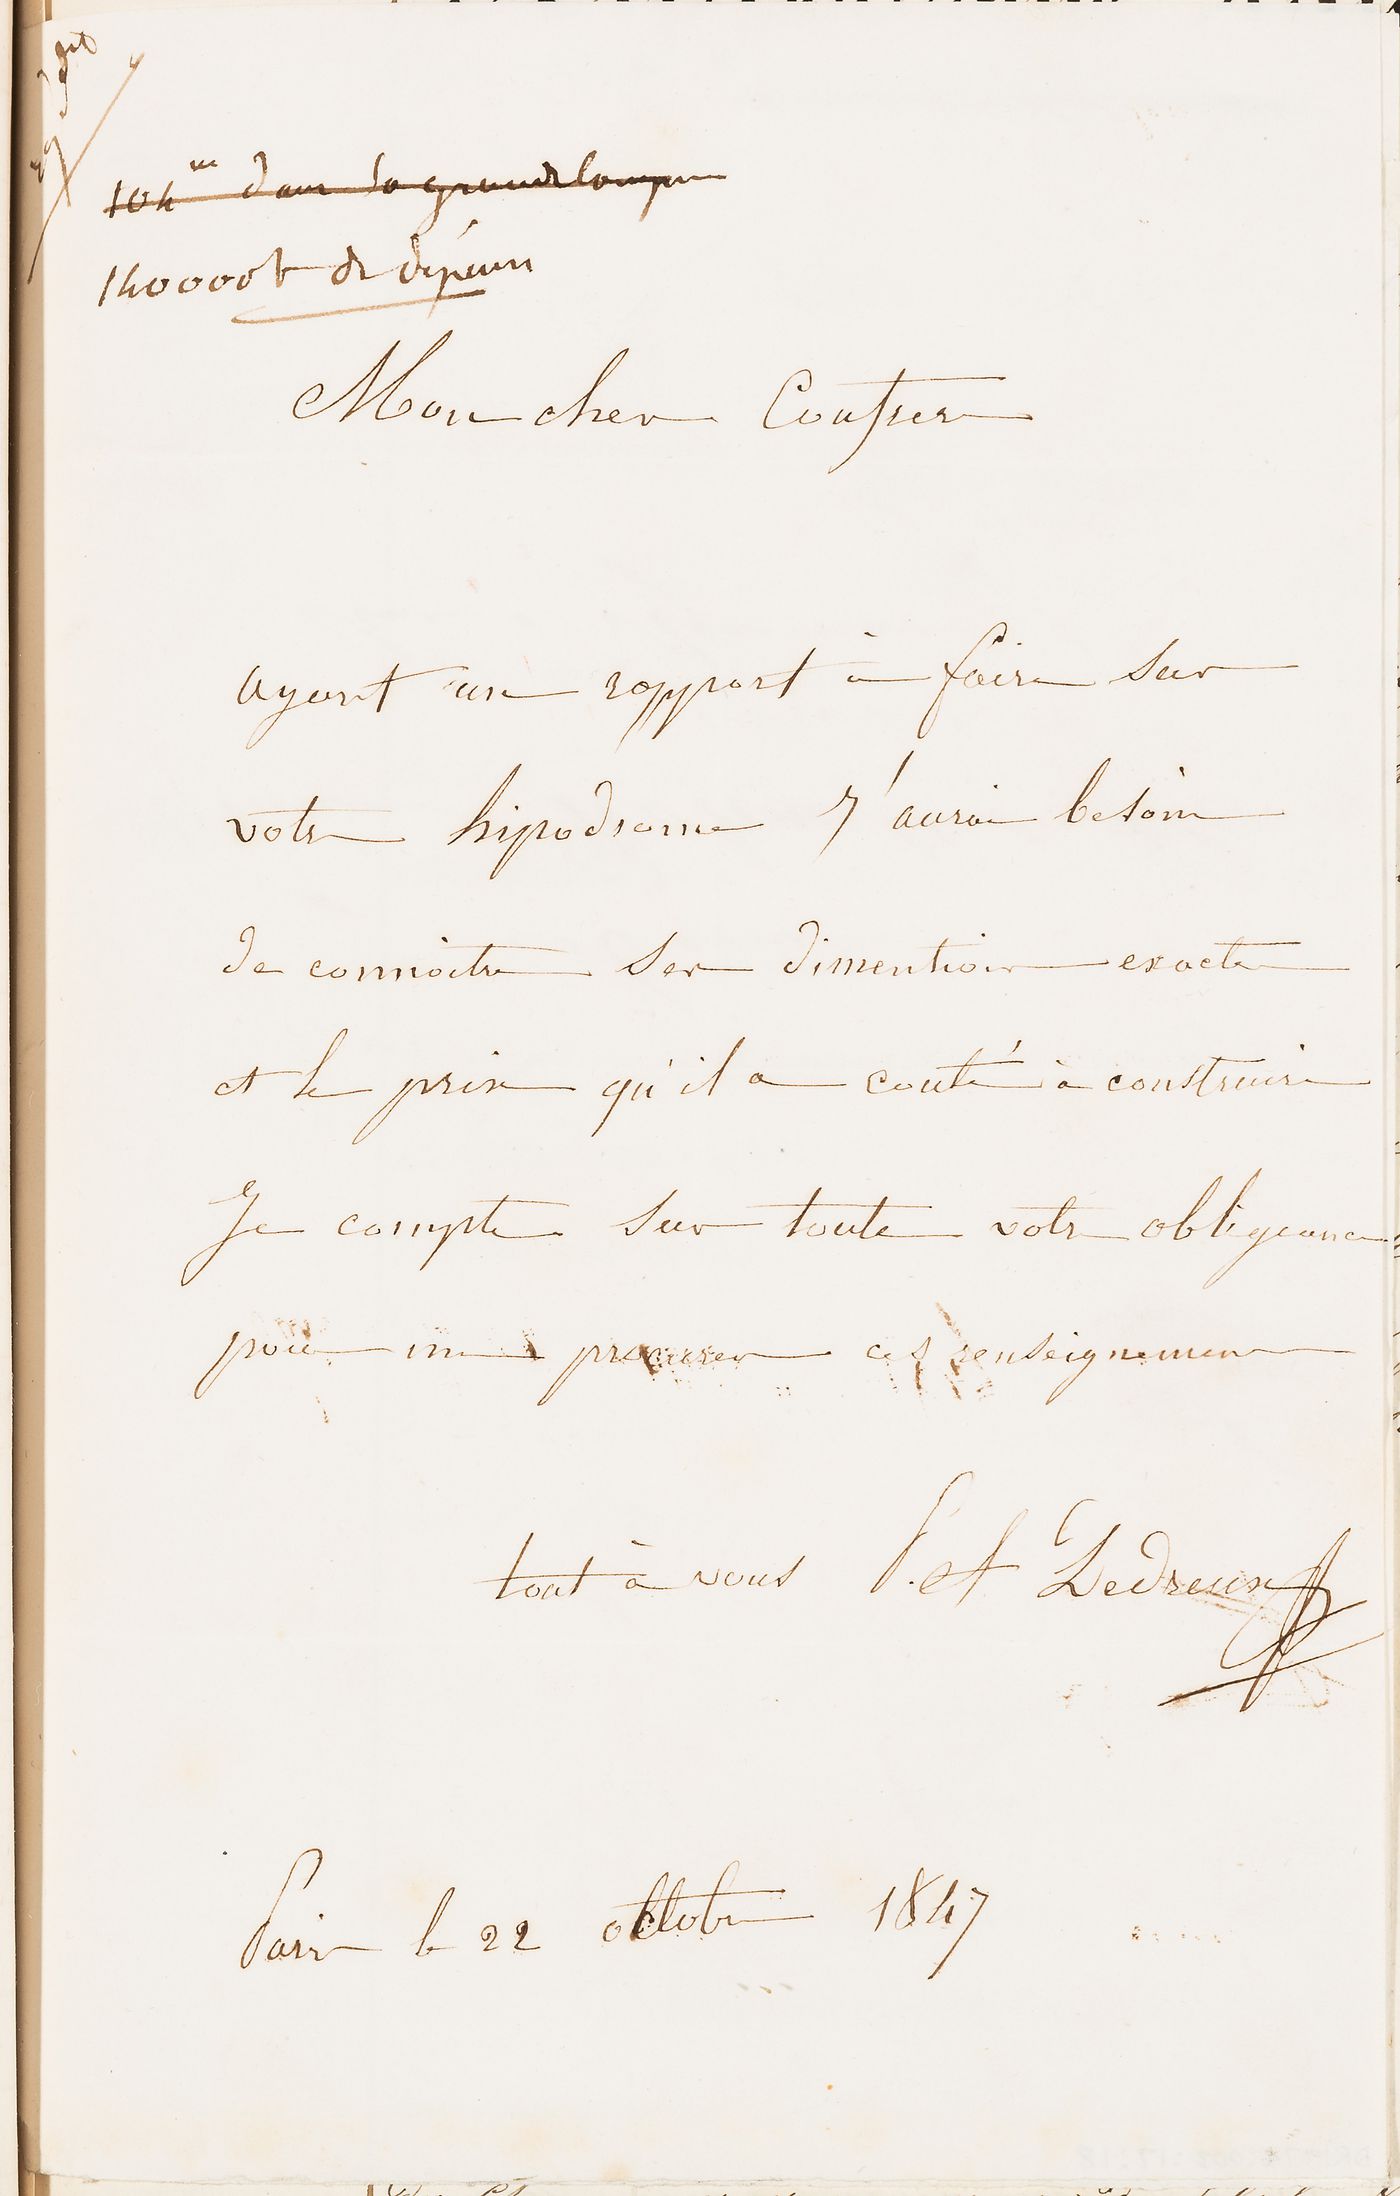 Letter from an unidentified correspondent to Charles Rohault de Fleury, 22 October 1847